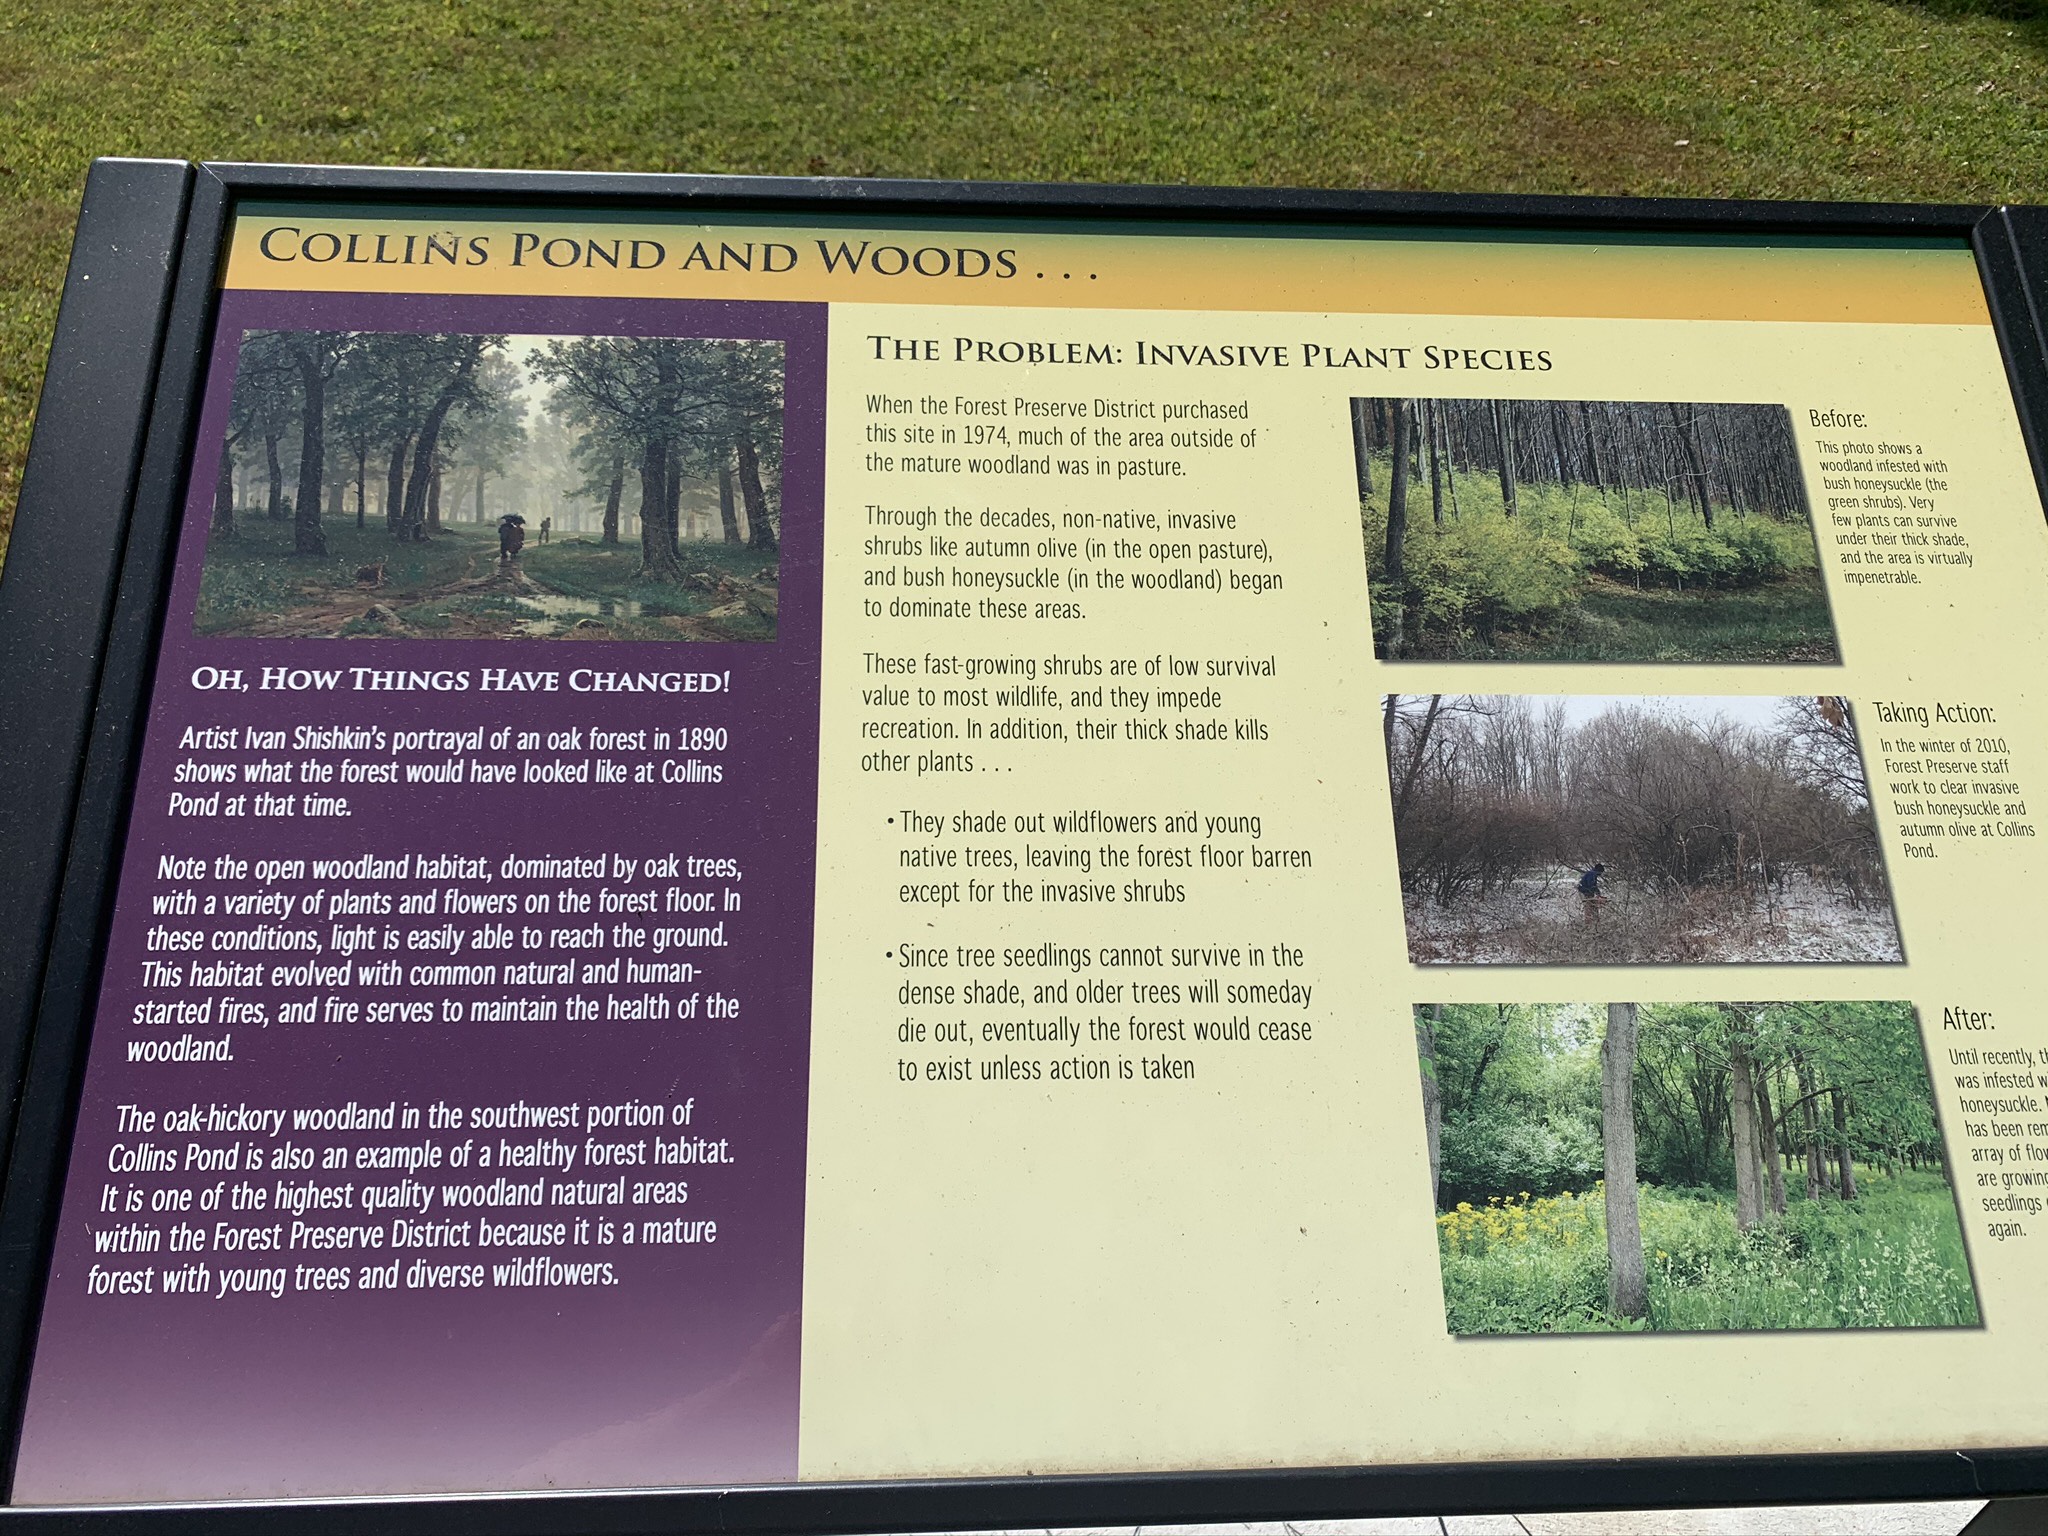 An informational poster on a large lectern discussing the history of Collins Pond. 